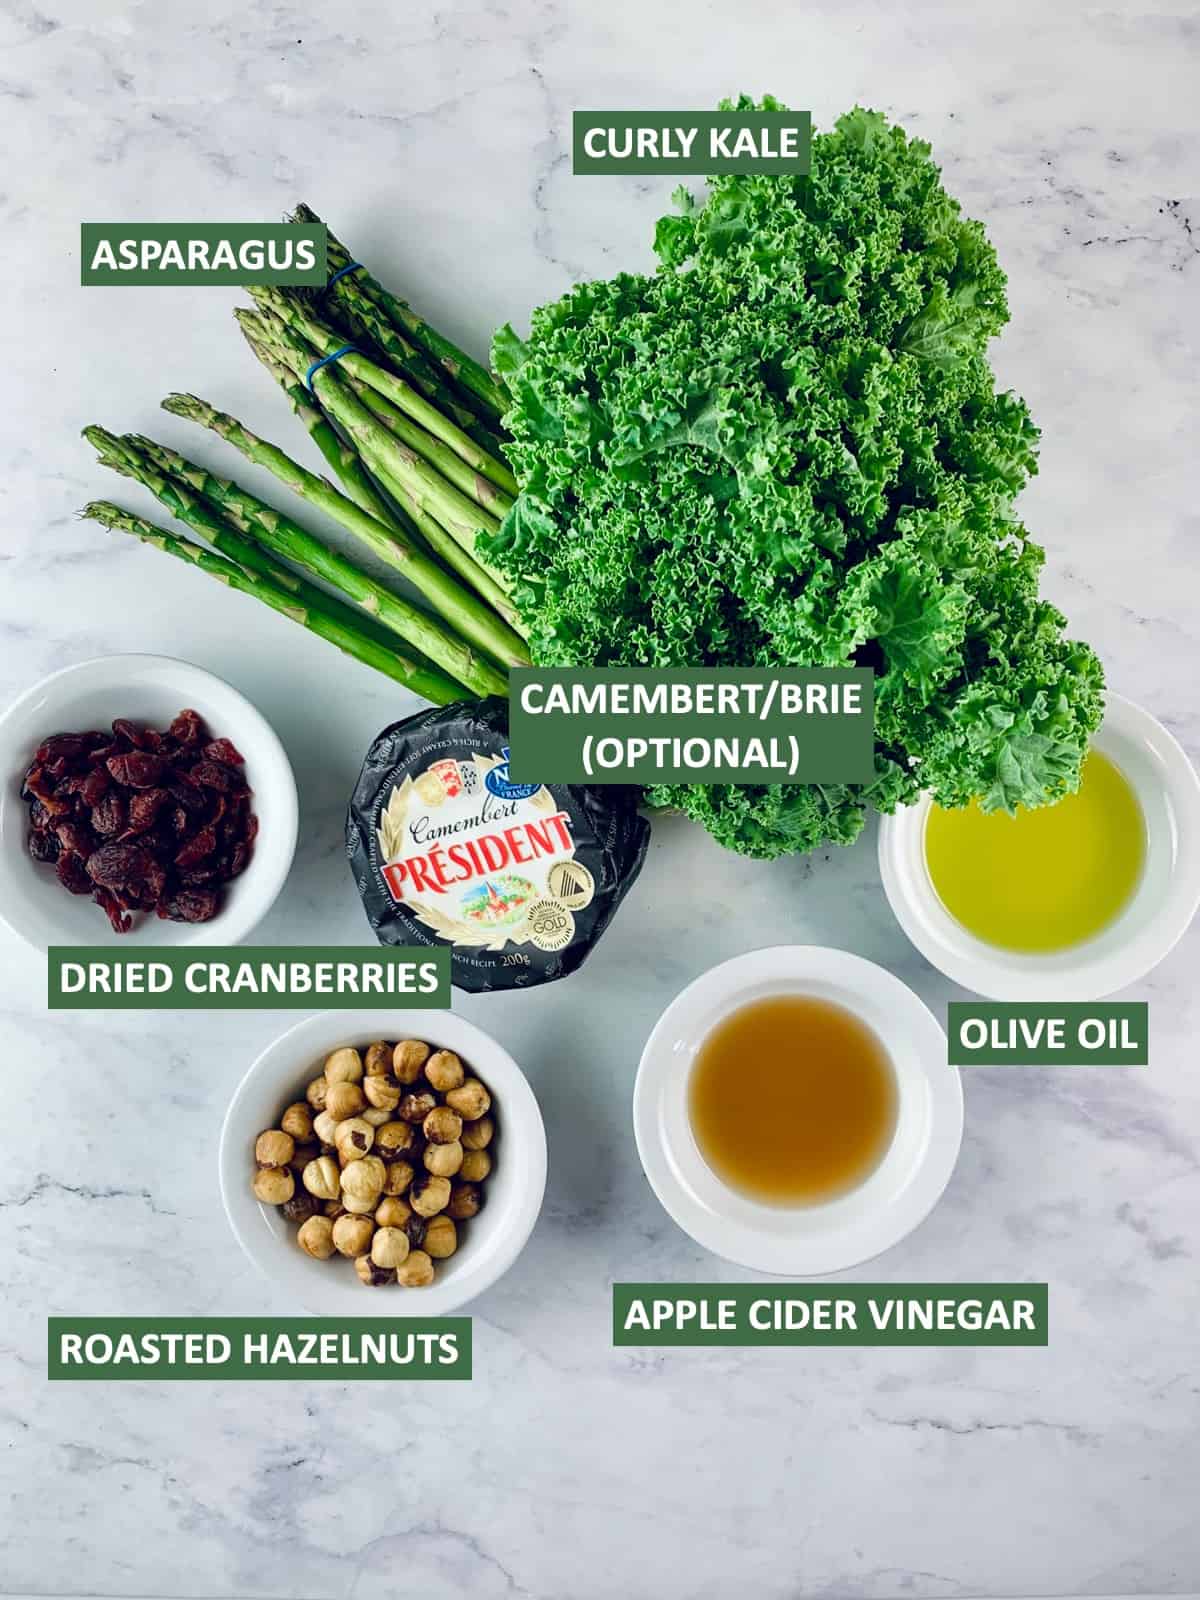 Labelled ingredients needed to make Kale and Cranberry salad.